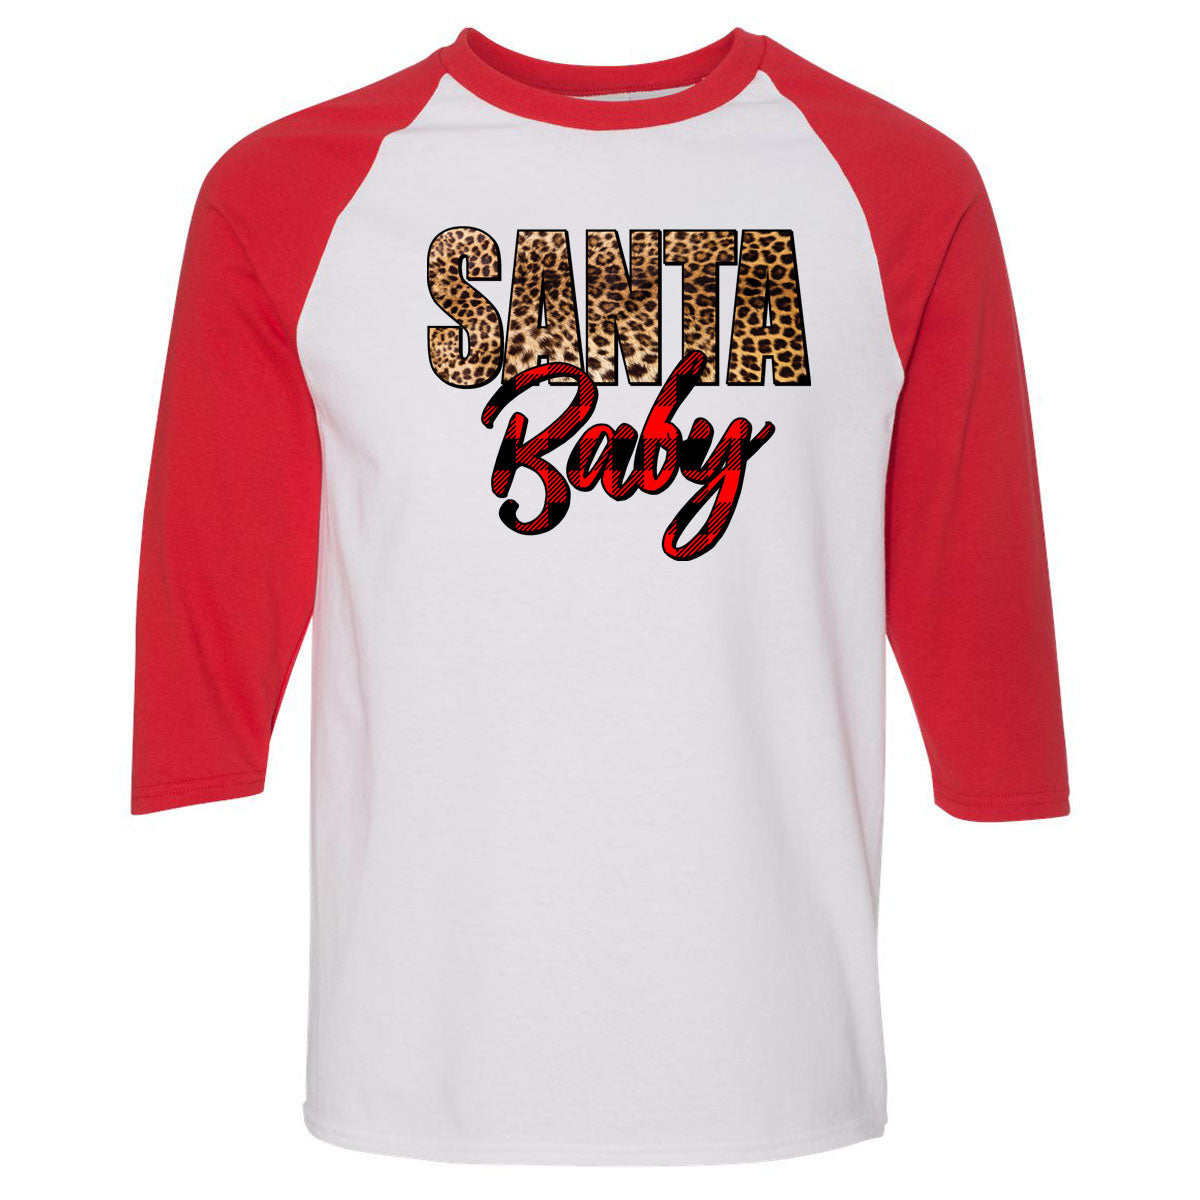 Santa Baby Leopard Plaid Tee - Southern Grace Creations